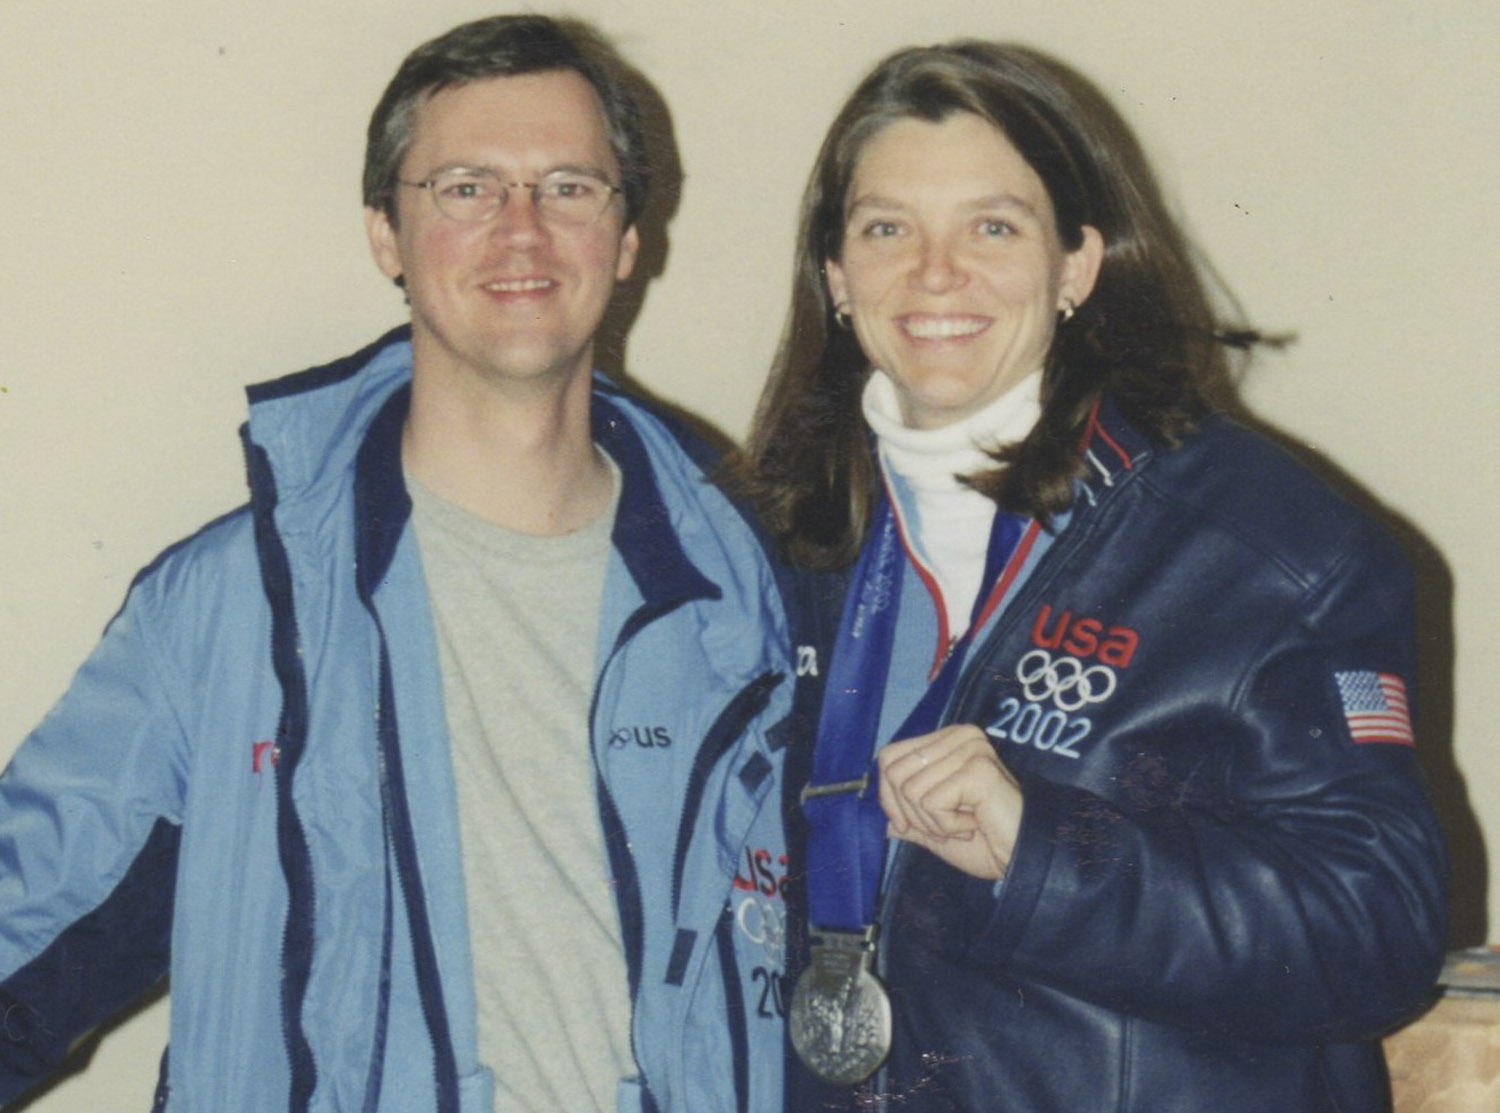 Parsley-Davenport’s  and her husband at the 2002 Olympics with her Silver Medal